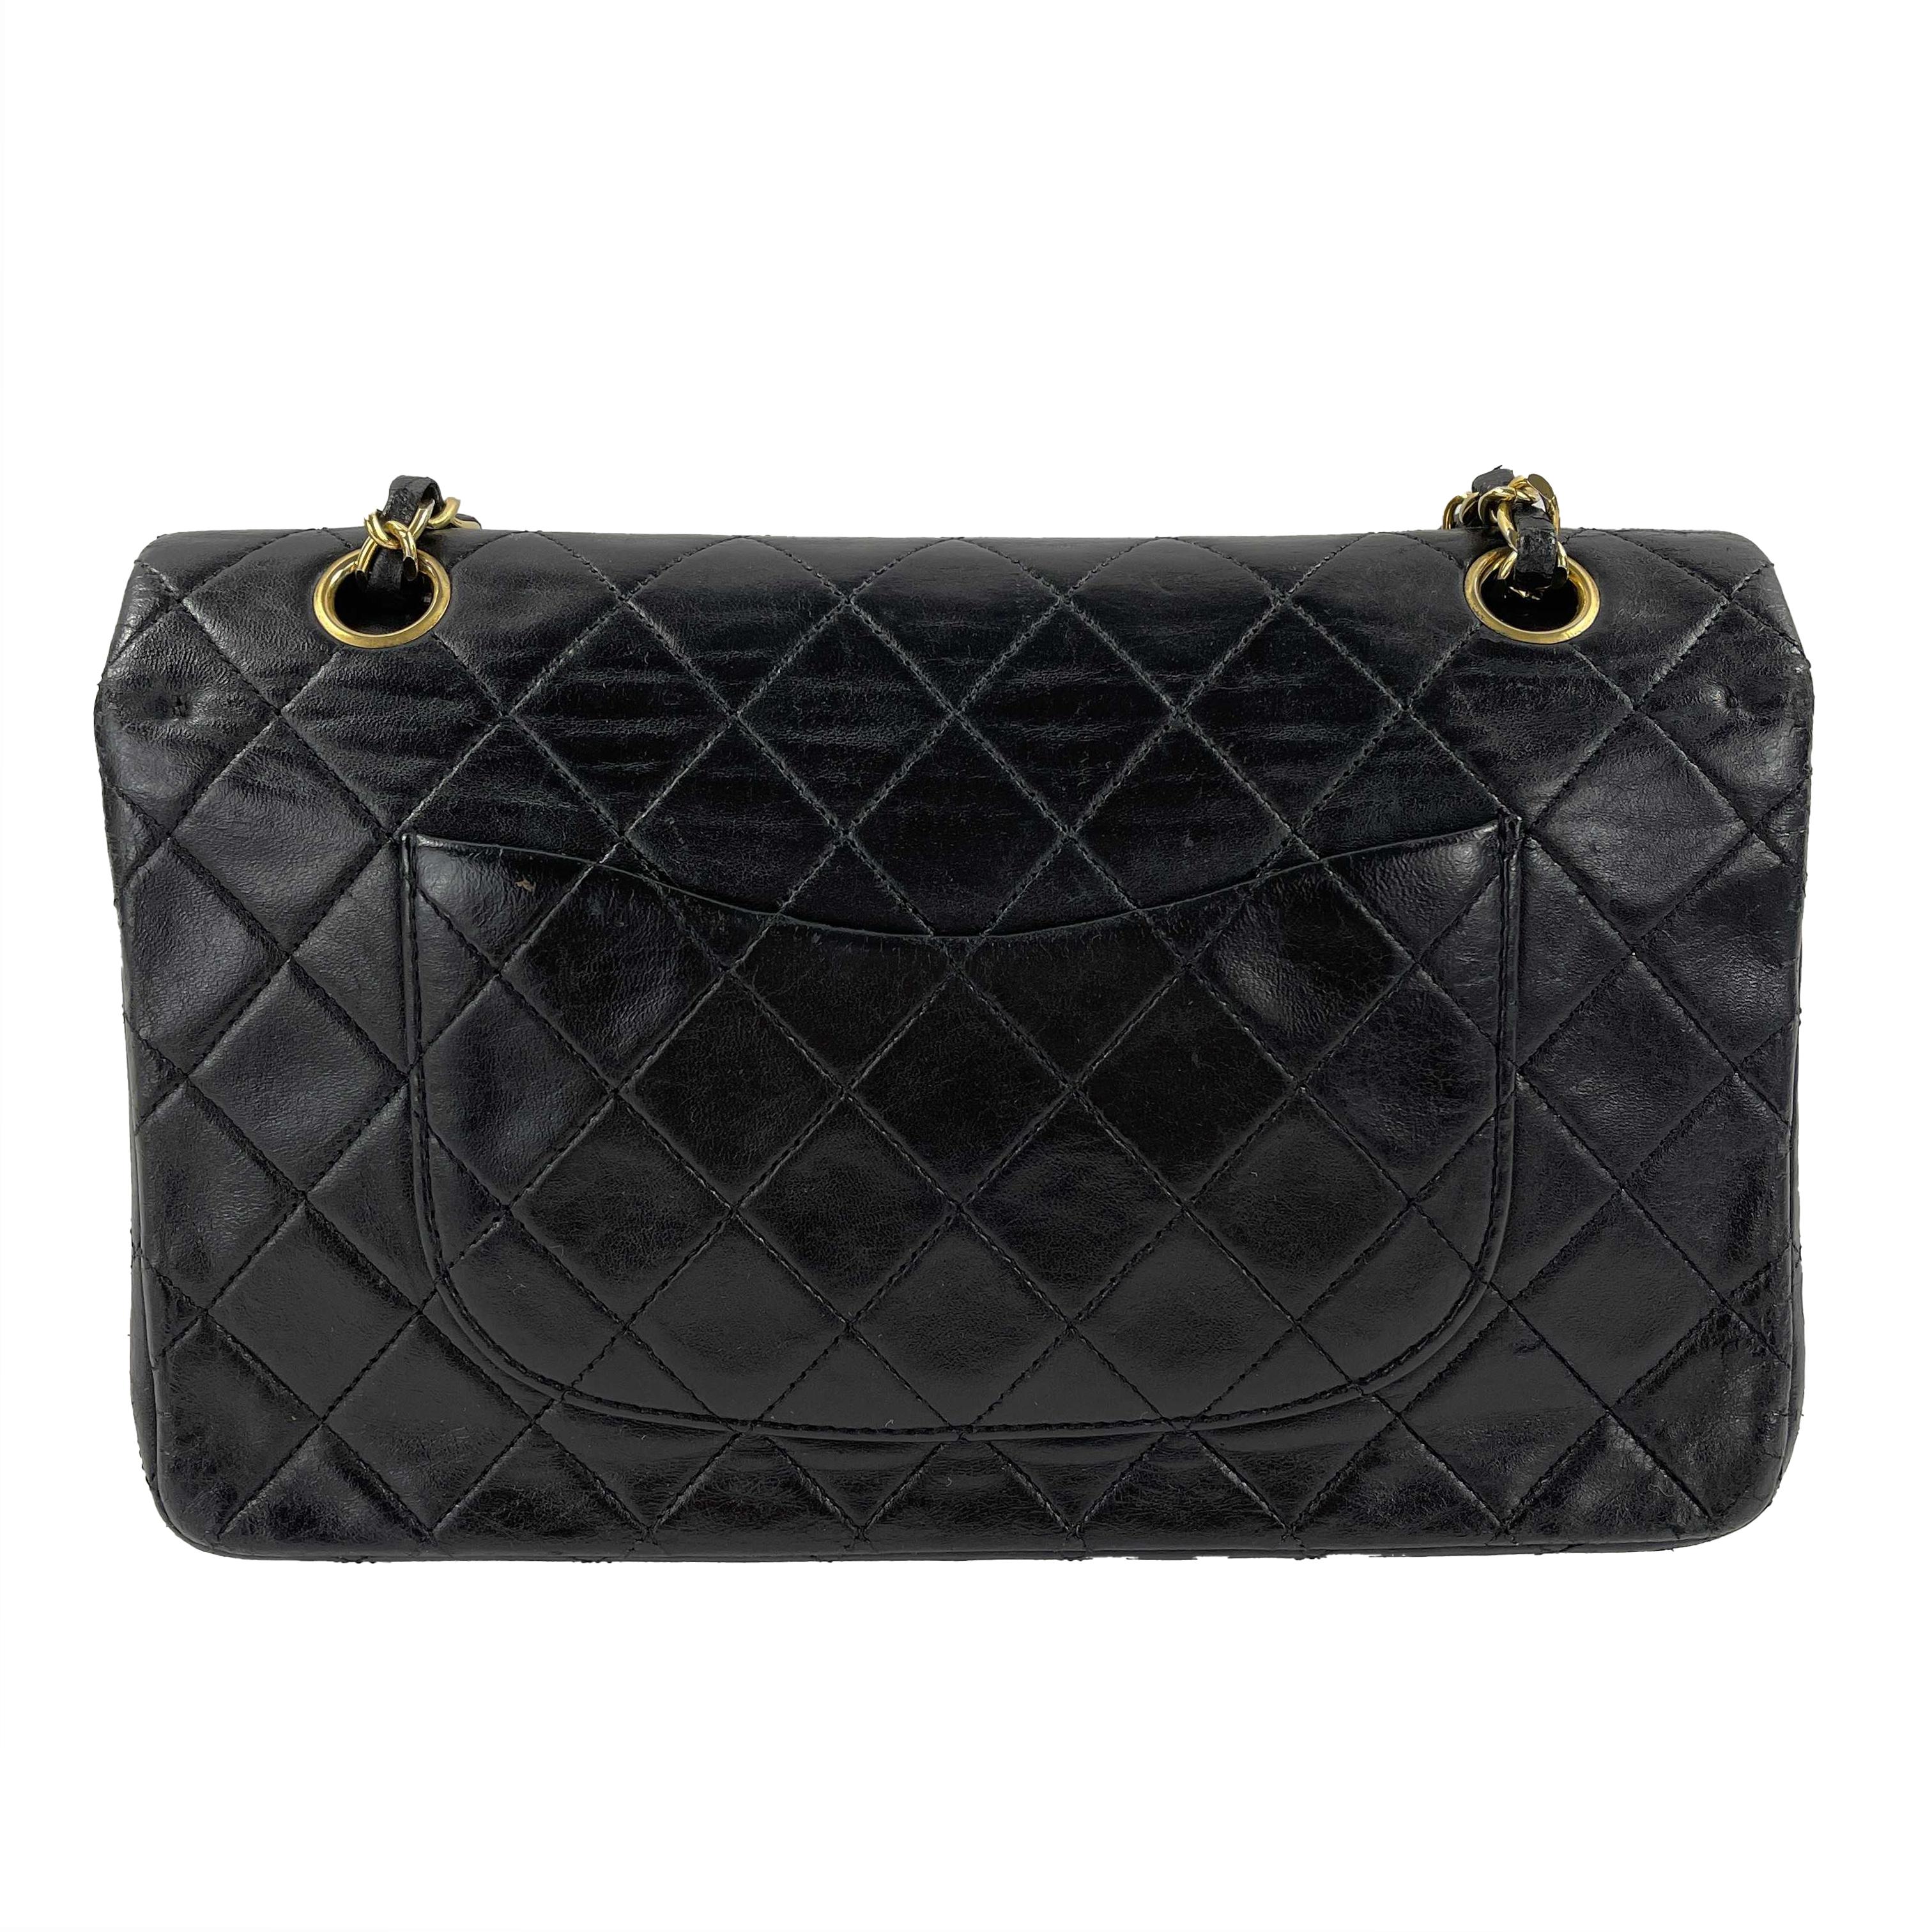 CHANEL - Vintage Black / Gold CC Medium Double Flap Quilted Shoulder / Crossbody

Description

This vintage Chanel flap handbag is from the 1989 to 1991 collection.
It is crafted with black quilted leather and gold-toned hardware throughout.
The